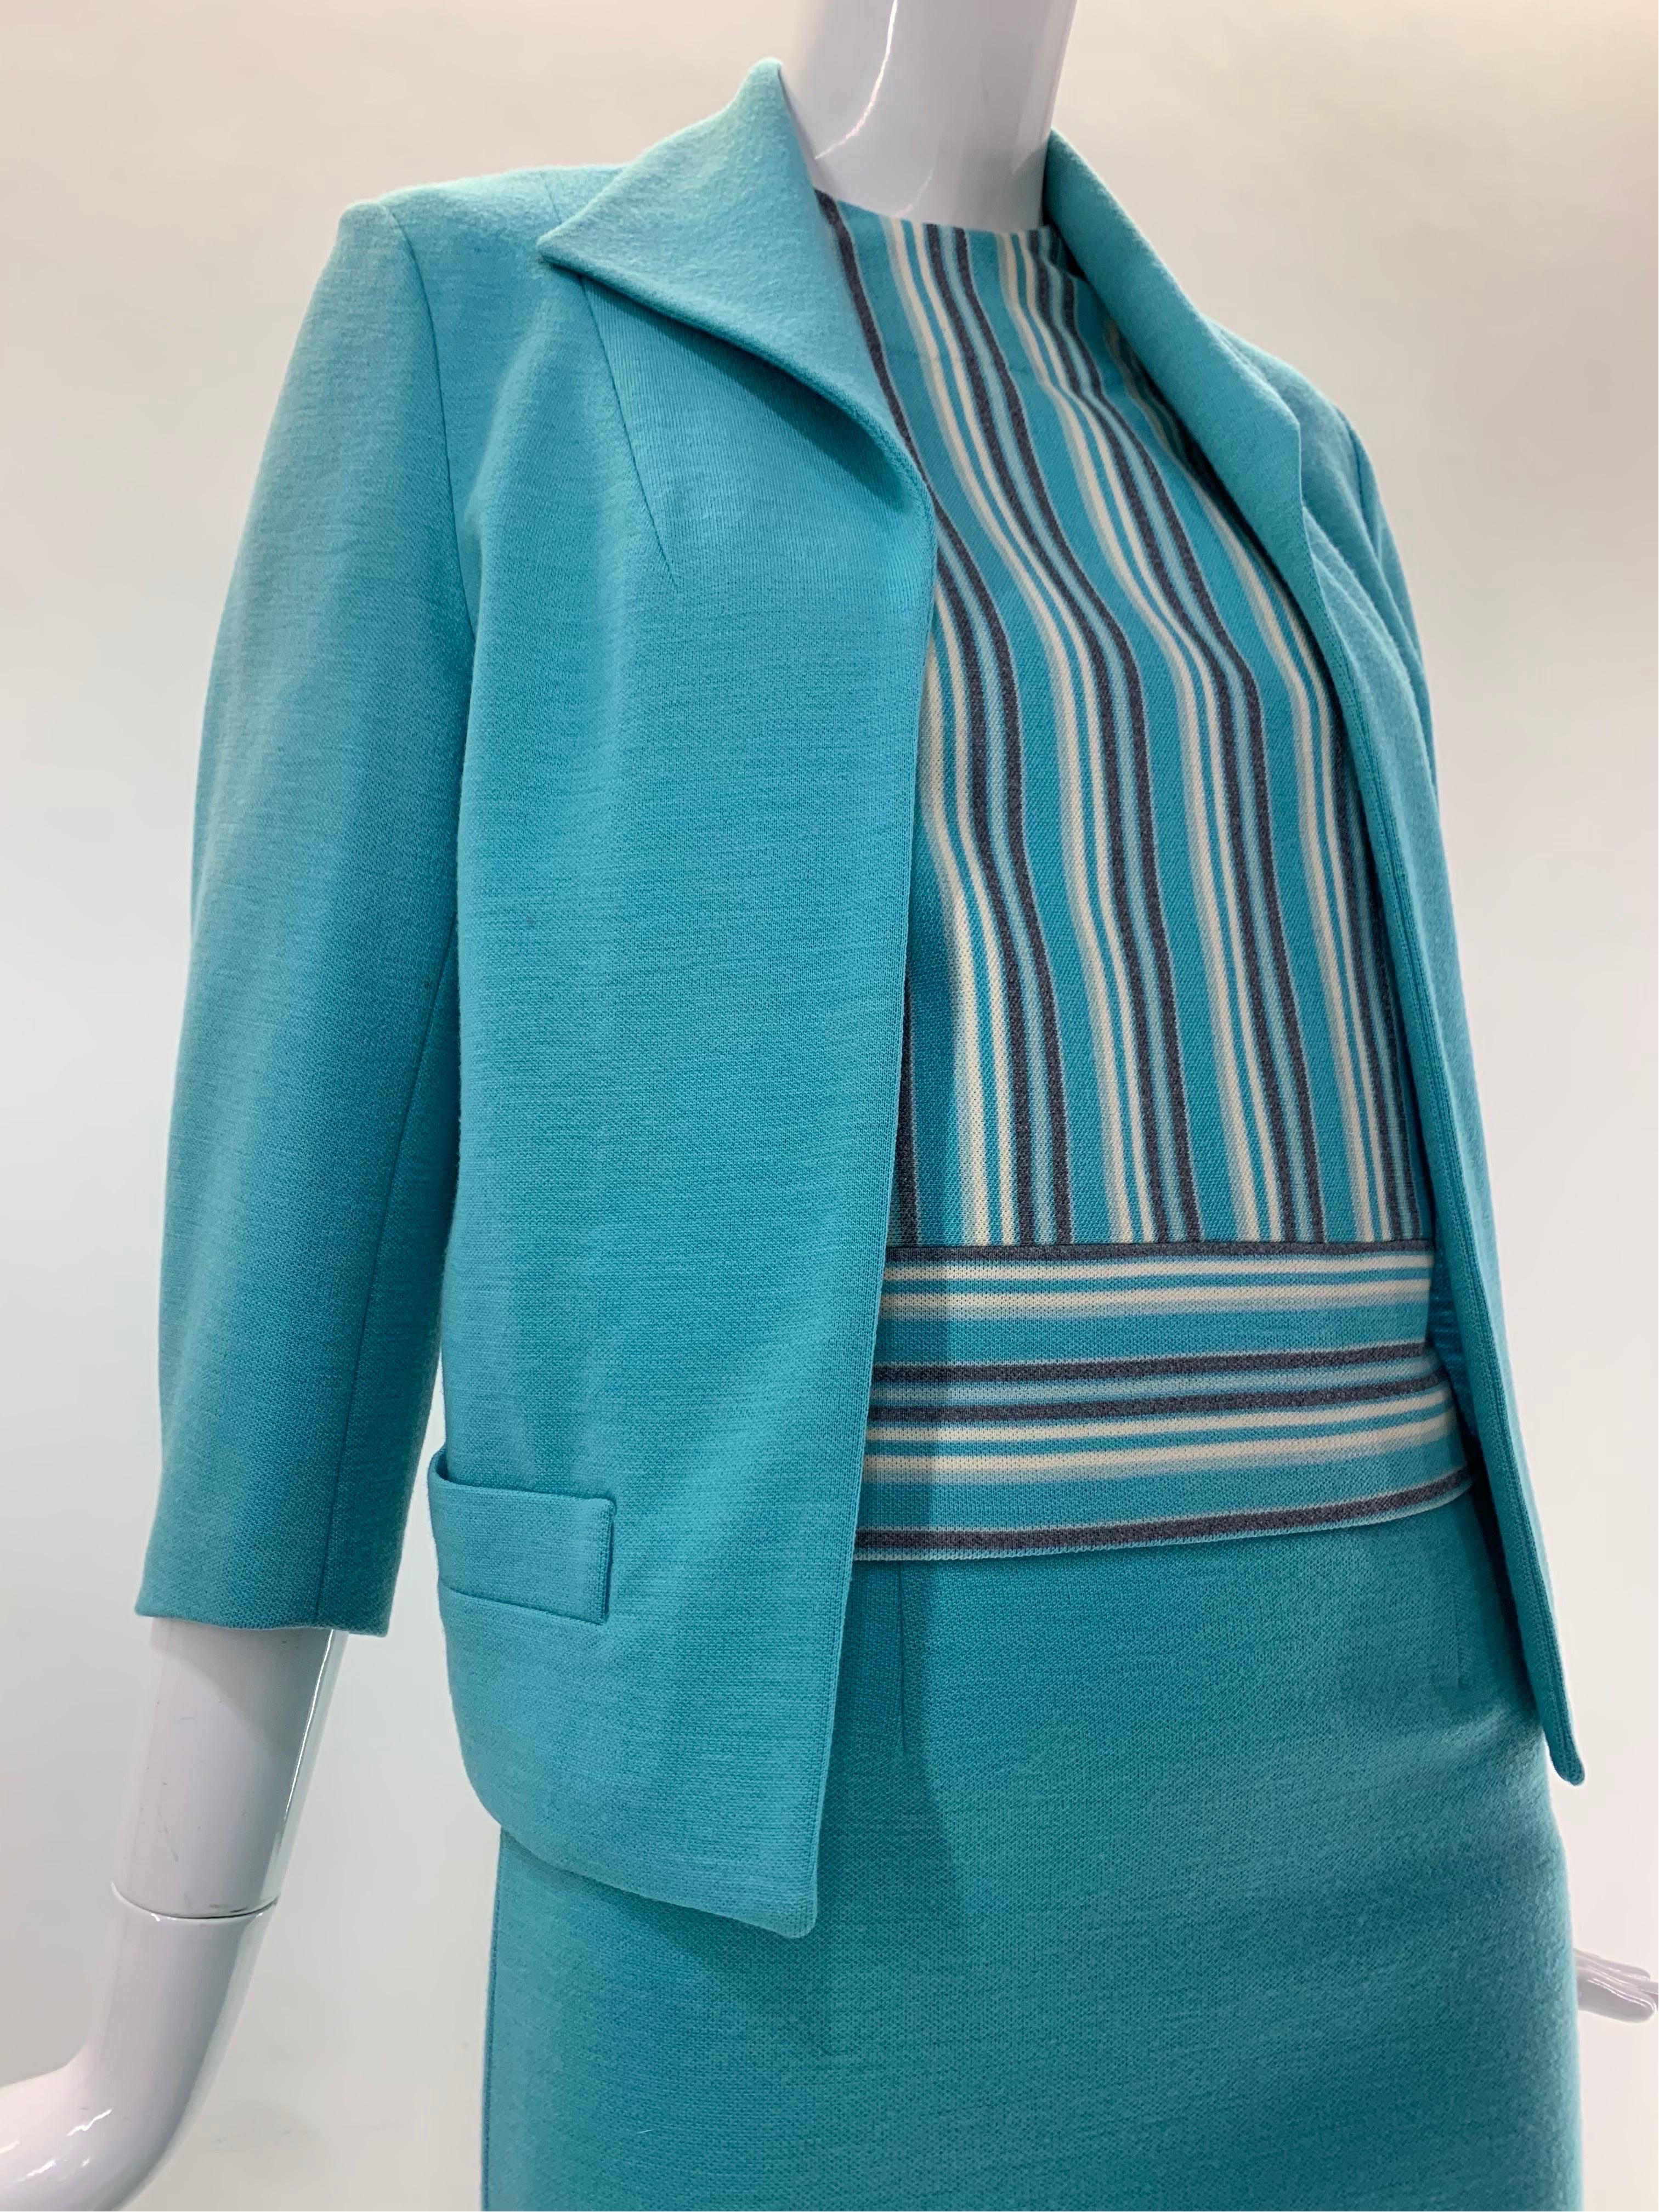 A smart and tidy 1960s Promenade - Holland turquoise wool double knit 3-piece skirt suit: Jacket and skirt in matching solid hue, blouse is a flattering narrow vertical stripe. Jacket is simply styled with single-point collar and no closures. Size 6.